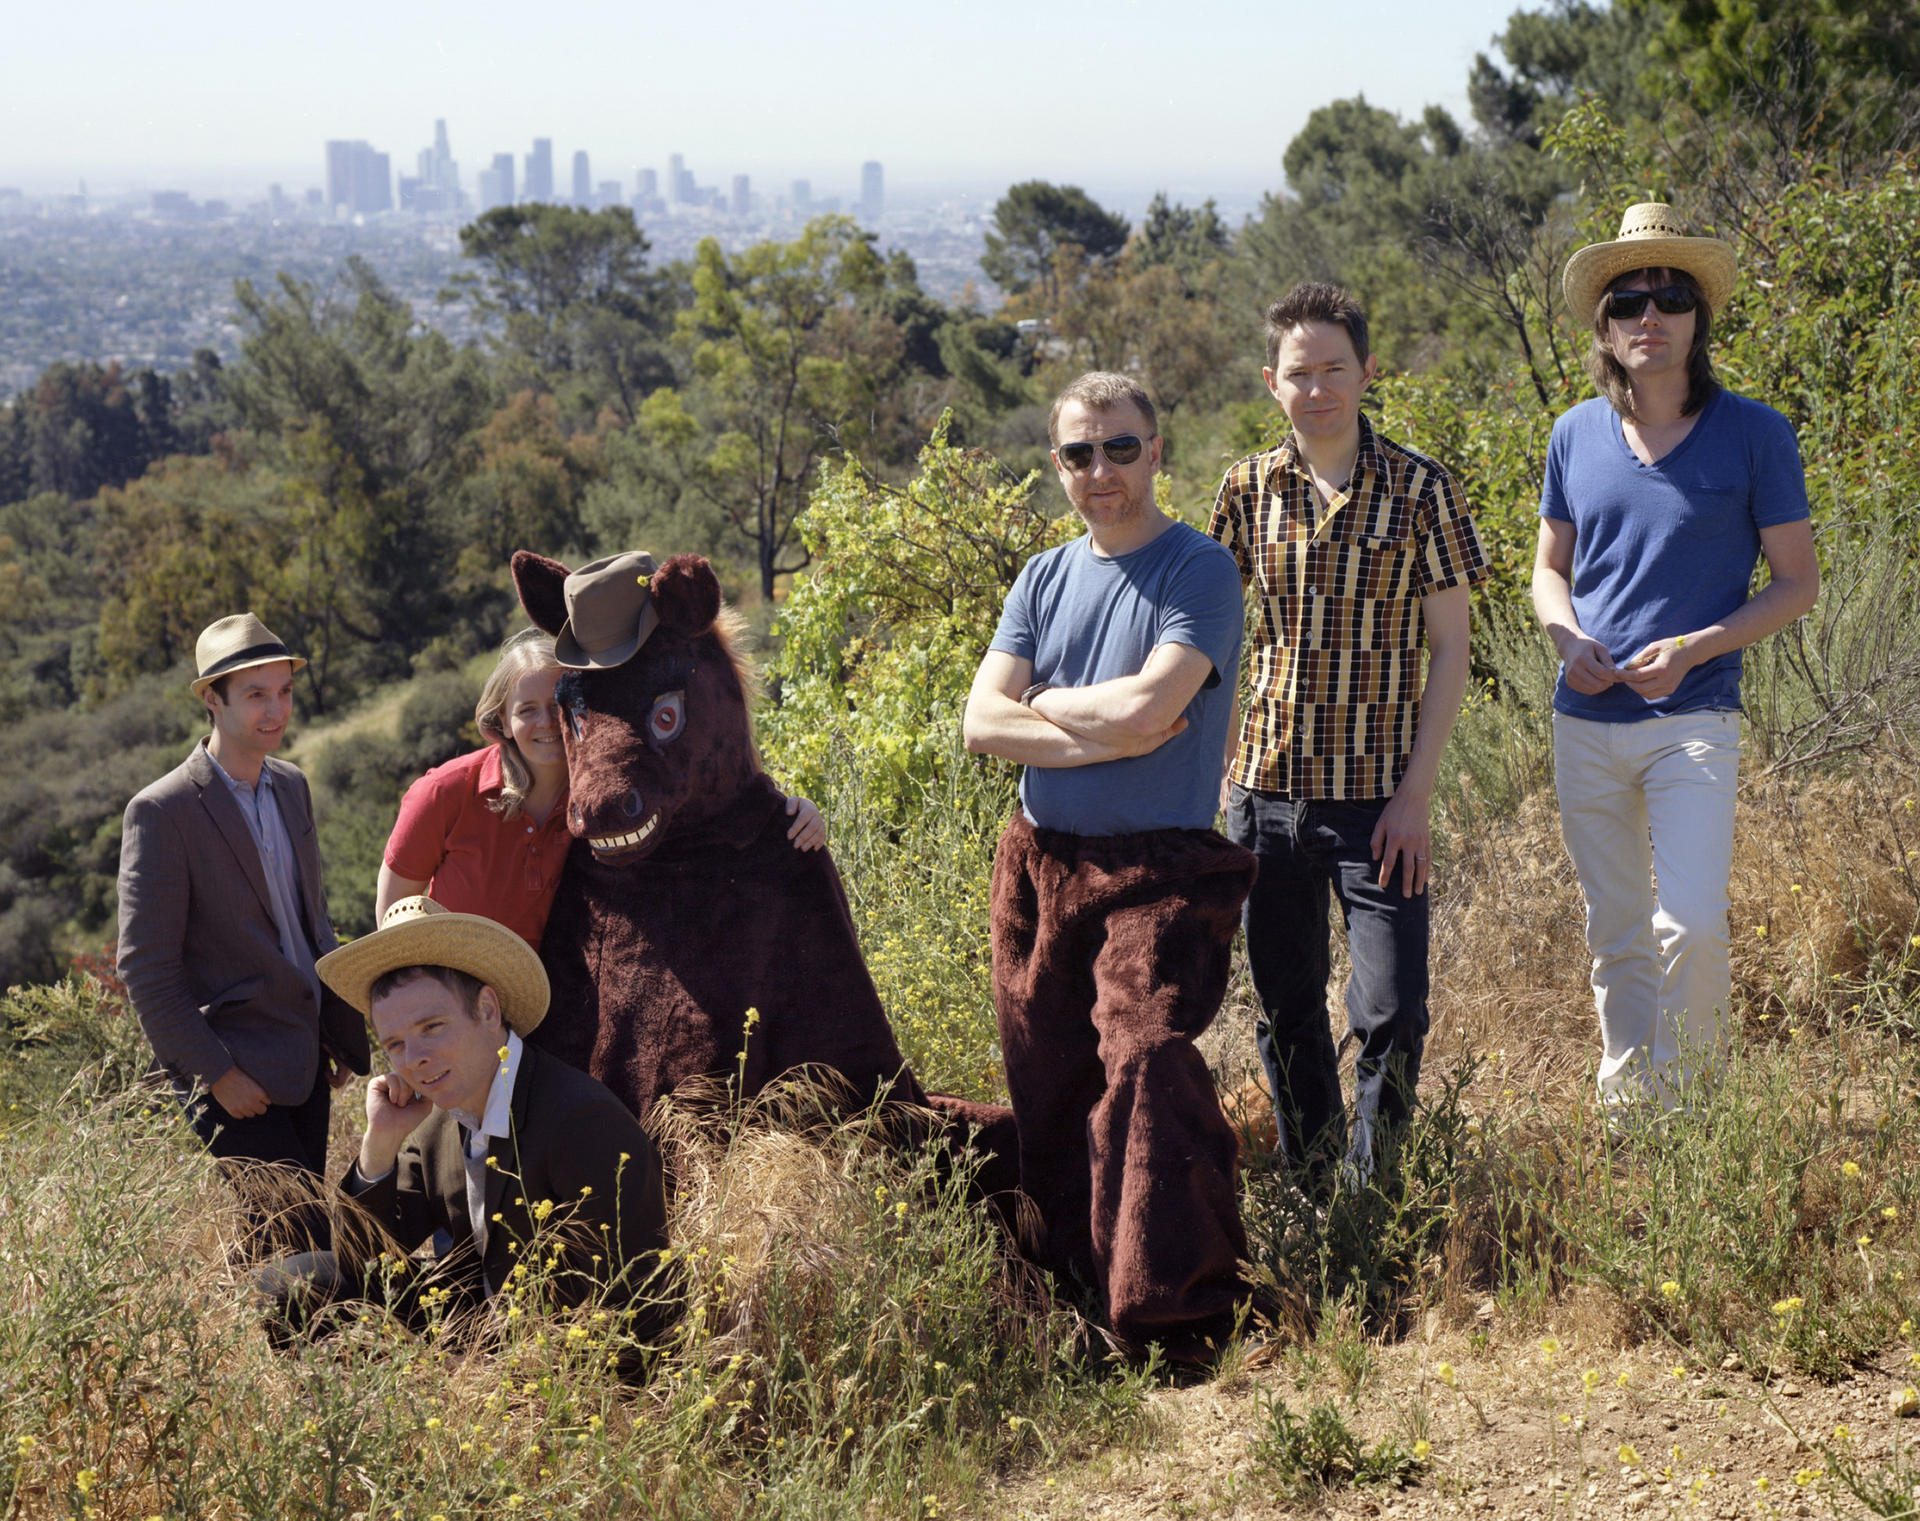 Belle and Sebastian promise fans a blend of new and old material at their Hong Kong gig.